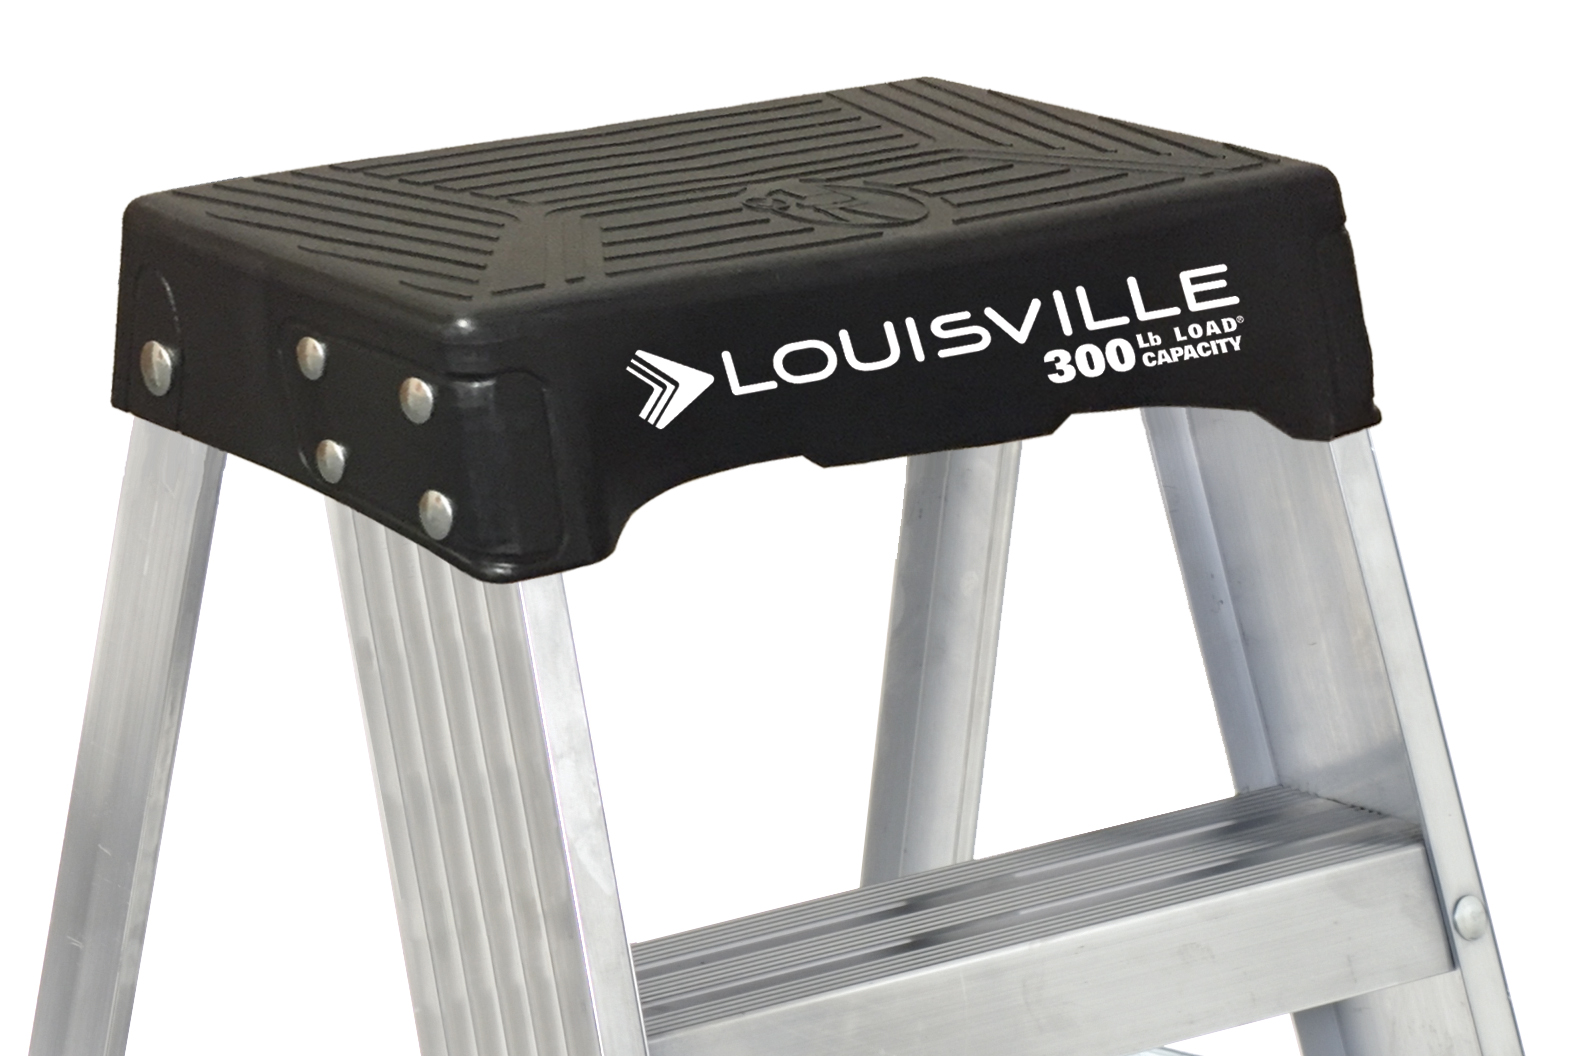 Details about   Louisville 2 Foot Step Ladder Stool Aluminum Small Compact Heavy Duty Bracing 